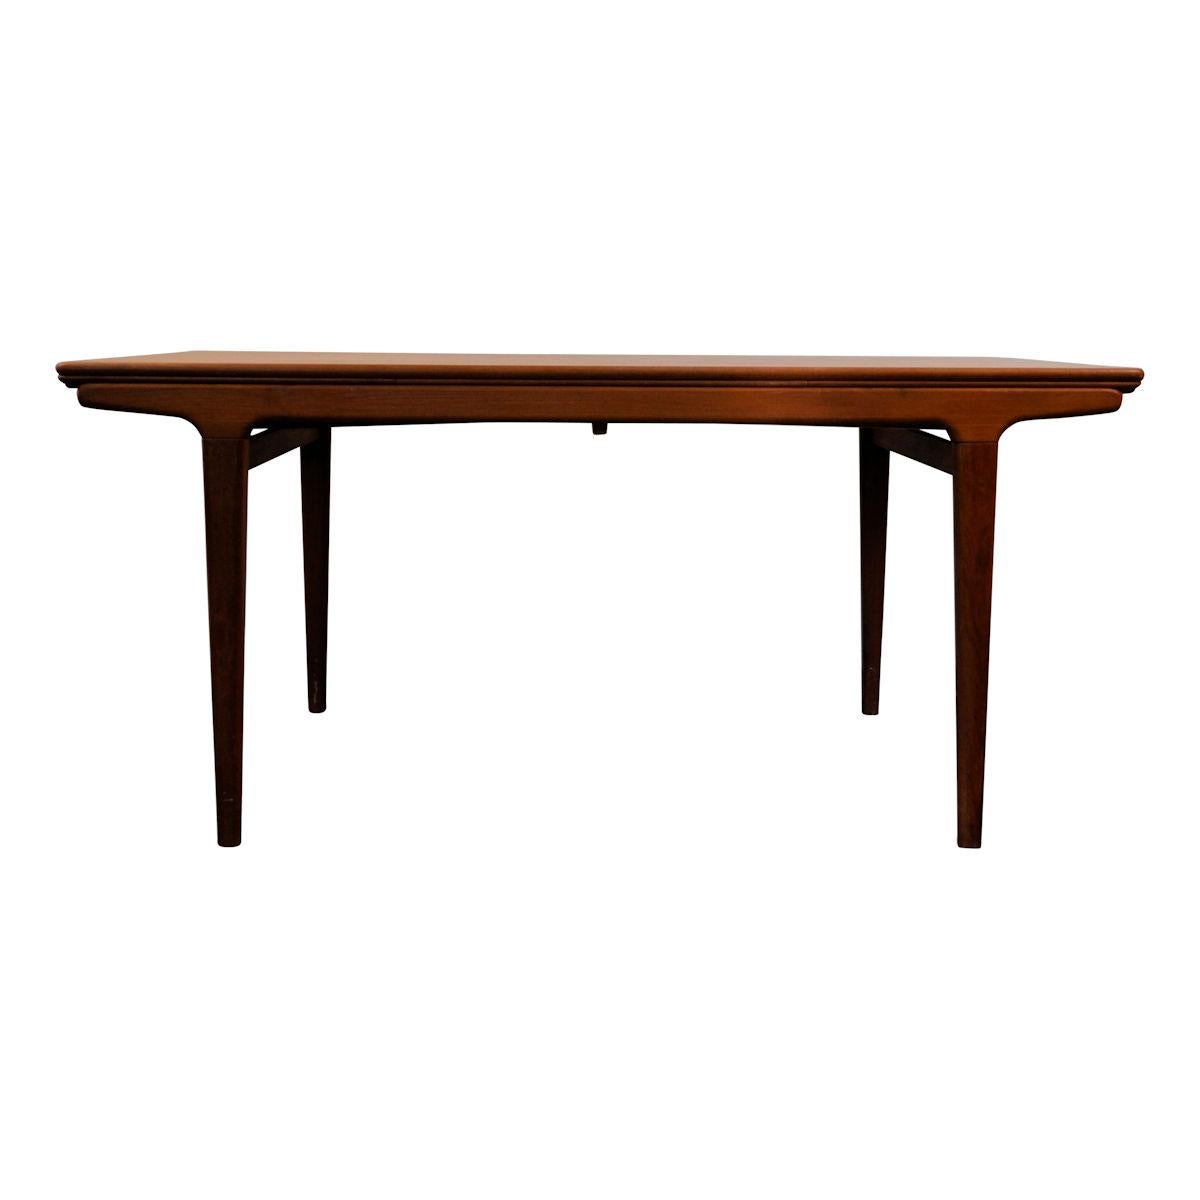 Gorgeous Danish modern teak dining table designed by Johannes Andersen for Uldum Møbelfabrik. Featuring a clean, timeless design and beautiful teak wood. You’ll easily host up to 10 (!) dinner guests with the pull out extension pieces which add up